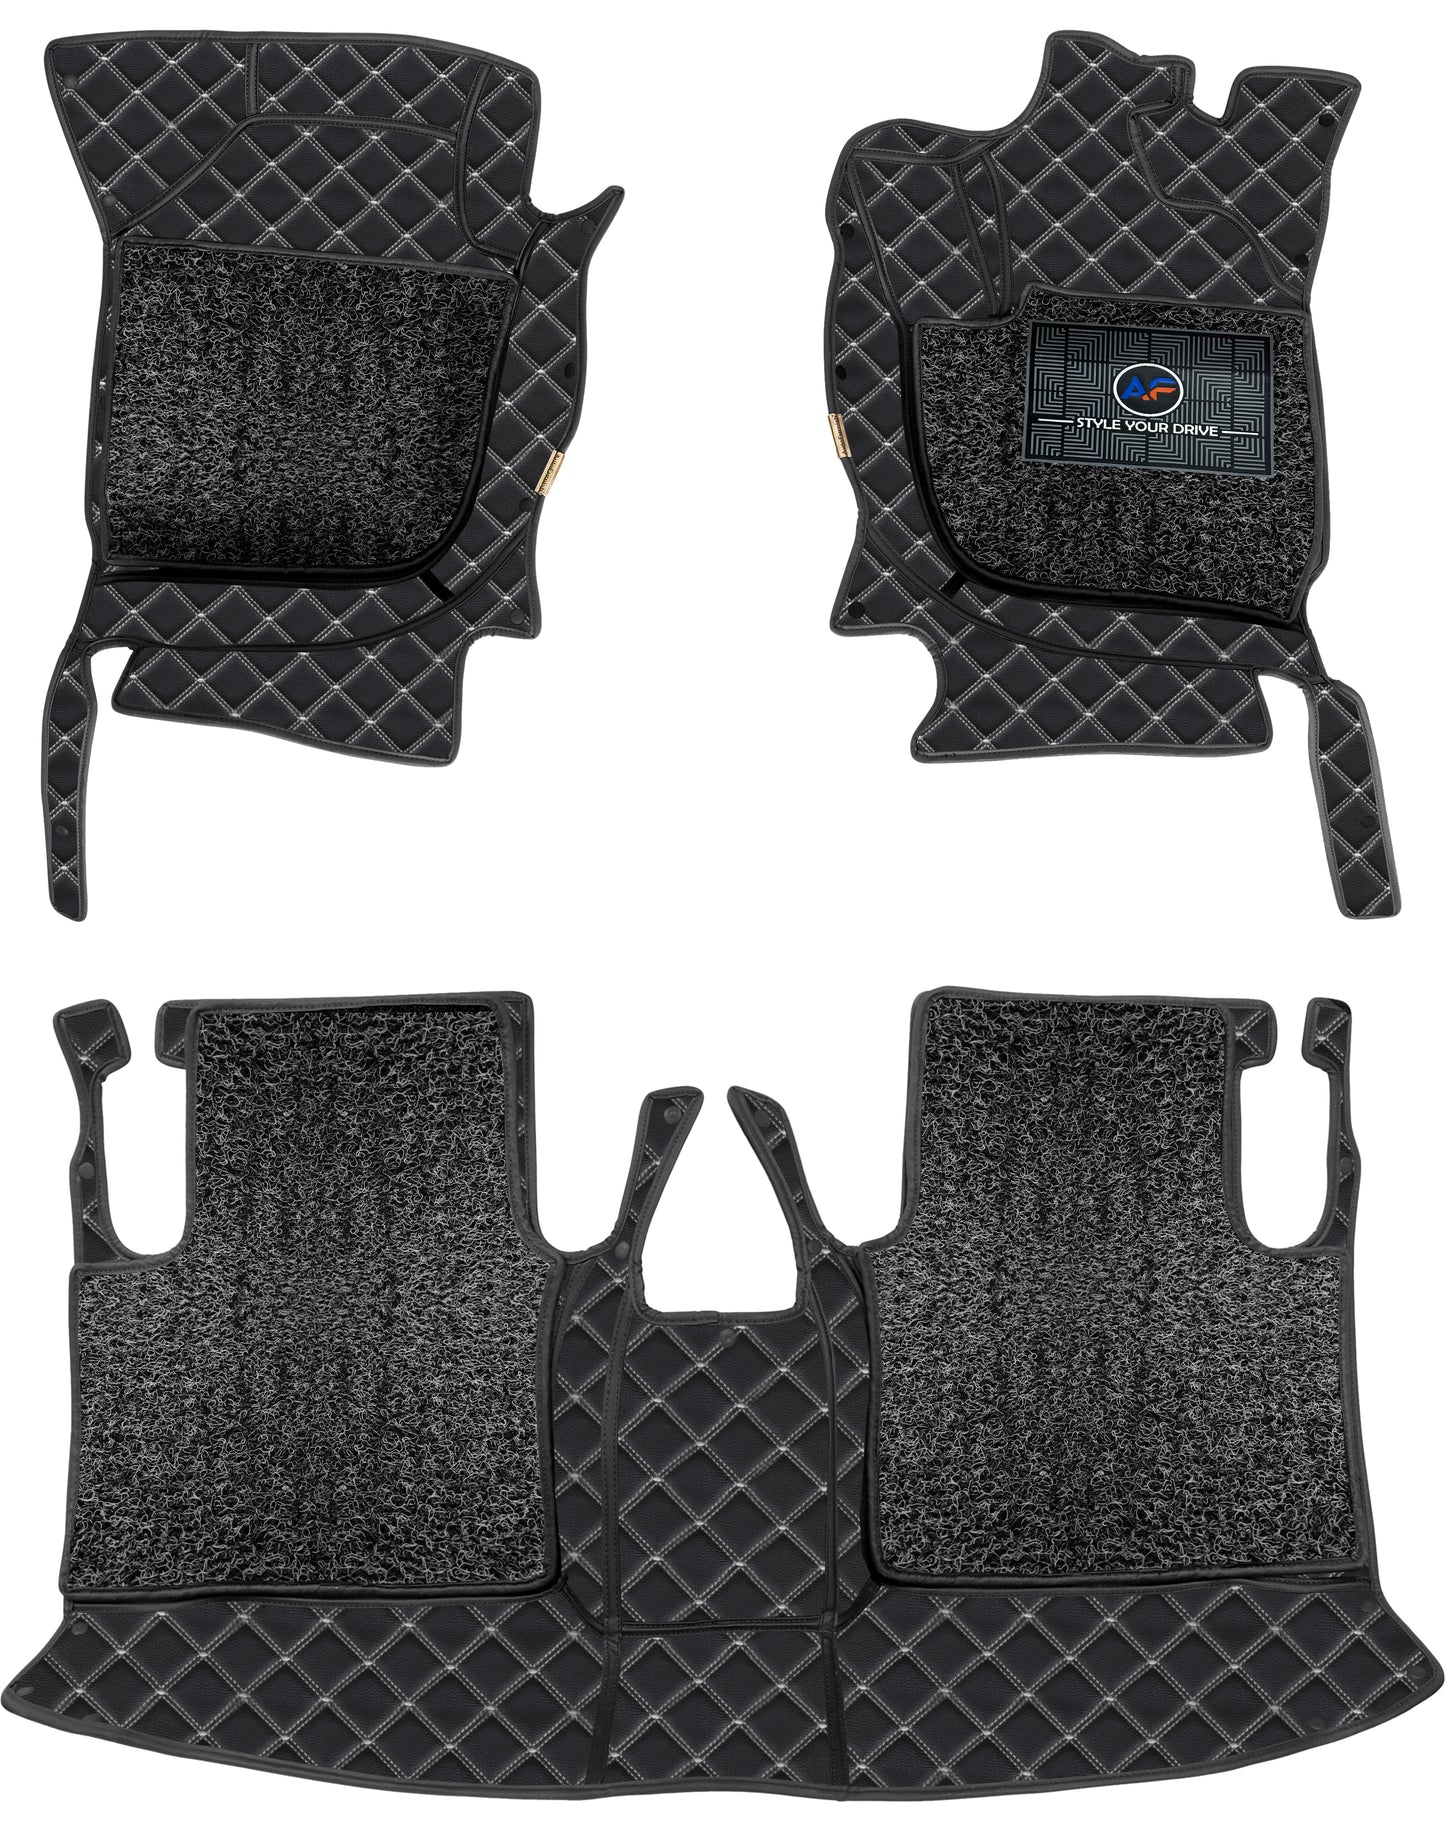 Mercedes E250 (2015-16)7D Luxury Car Mat, All Weather Proof, Anti-Skid, 100% Waterproof & Odorless with Unique Diamond Fish Design (24mm Luxury PU Leather, 2 Rows)